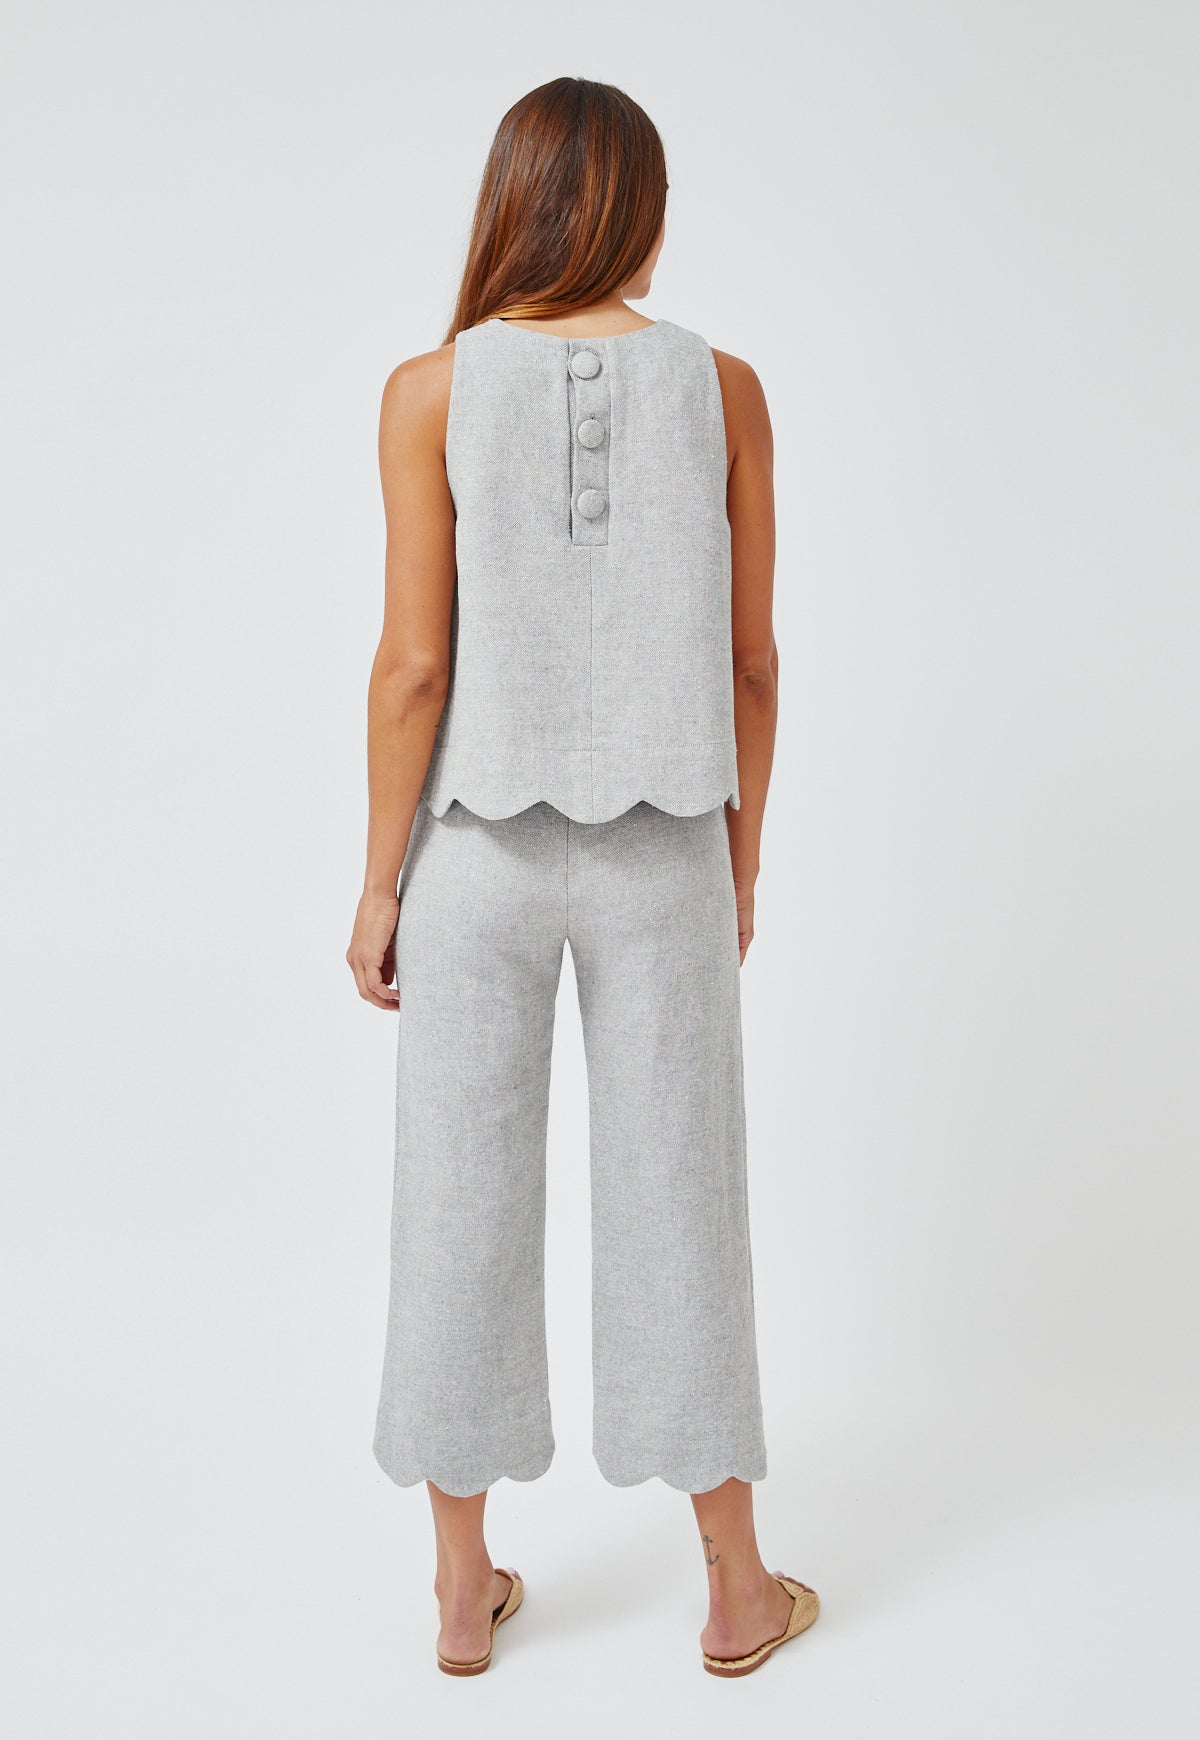 THE SCALLOP TRAPEZE TOP in VINTAGE BLUE SUMMER TWEED LINEN